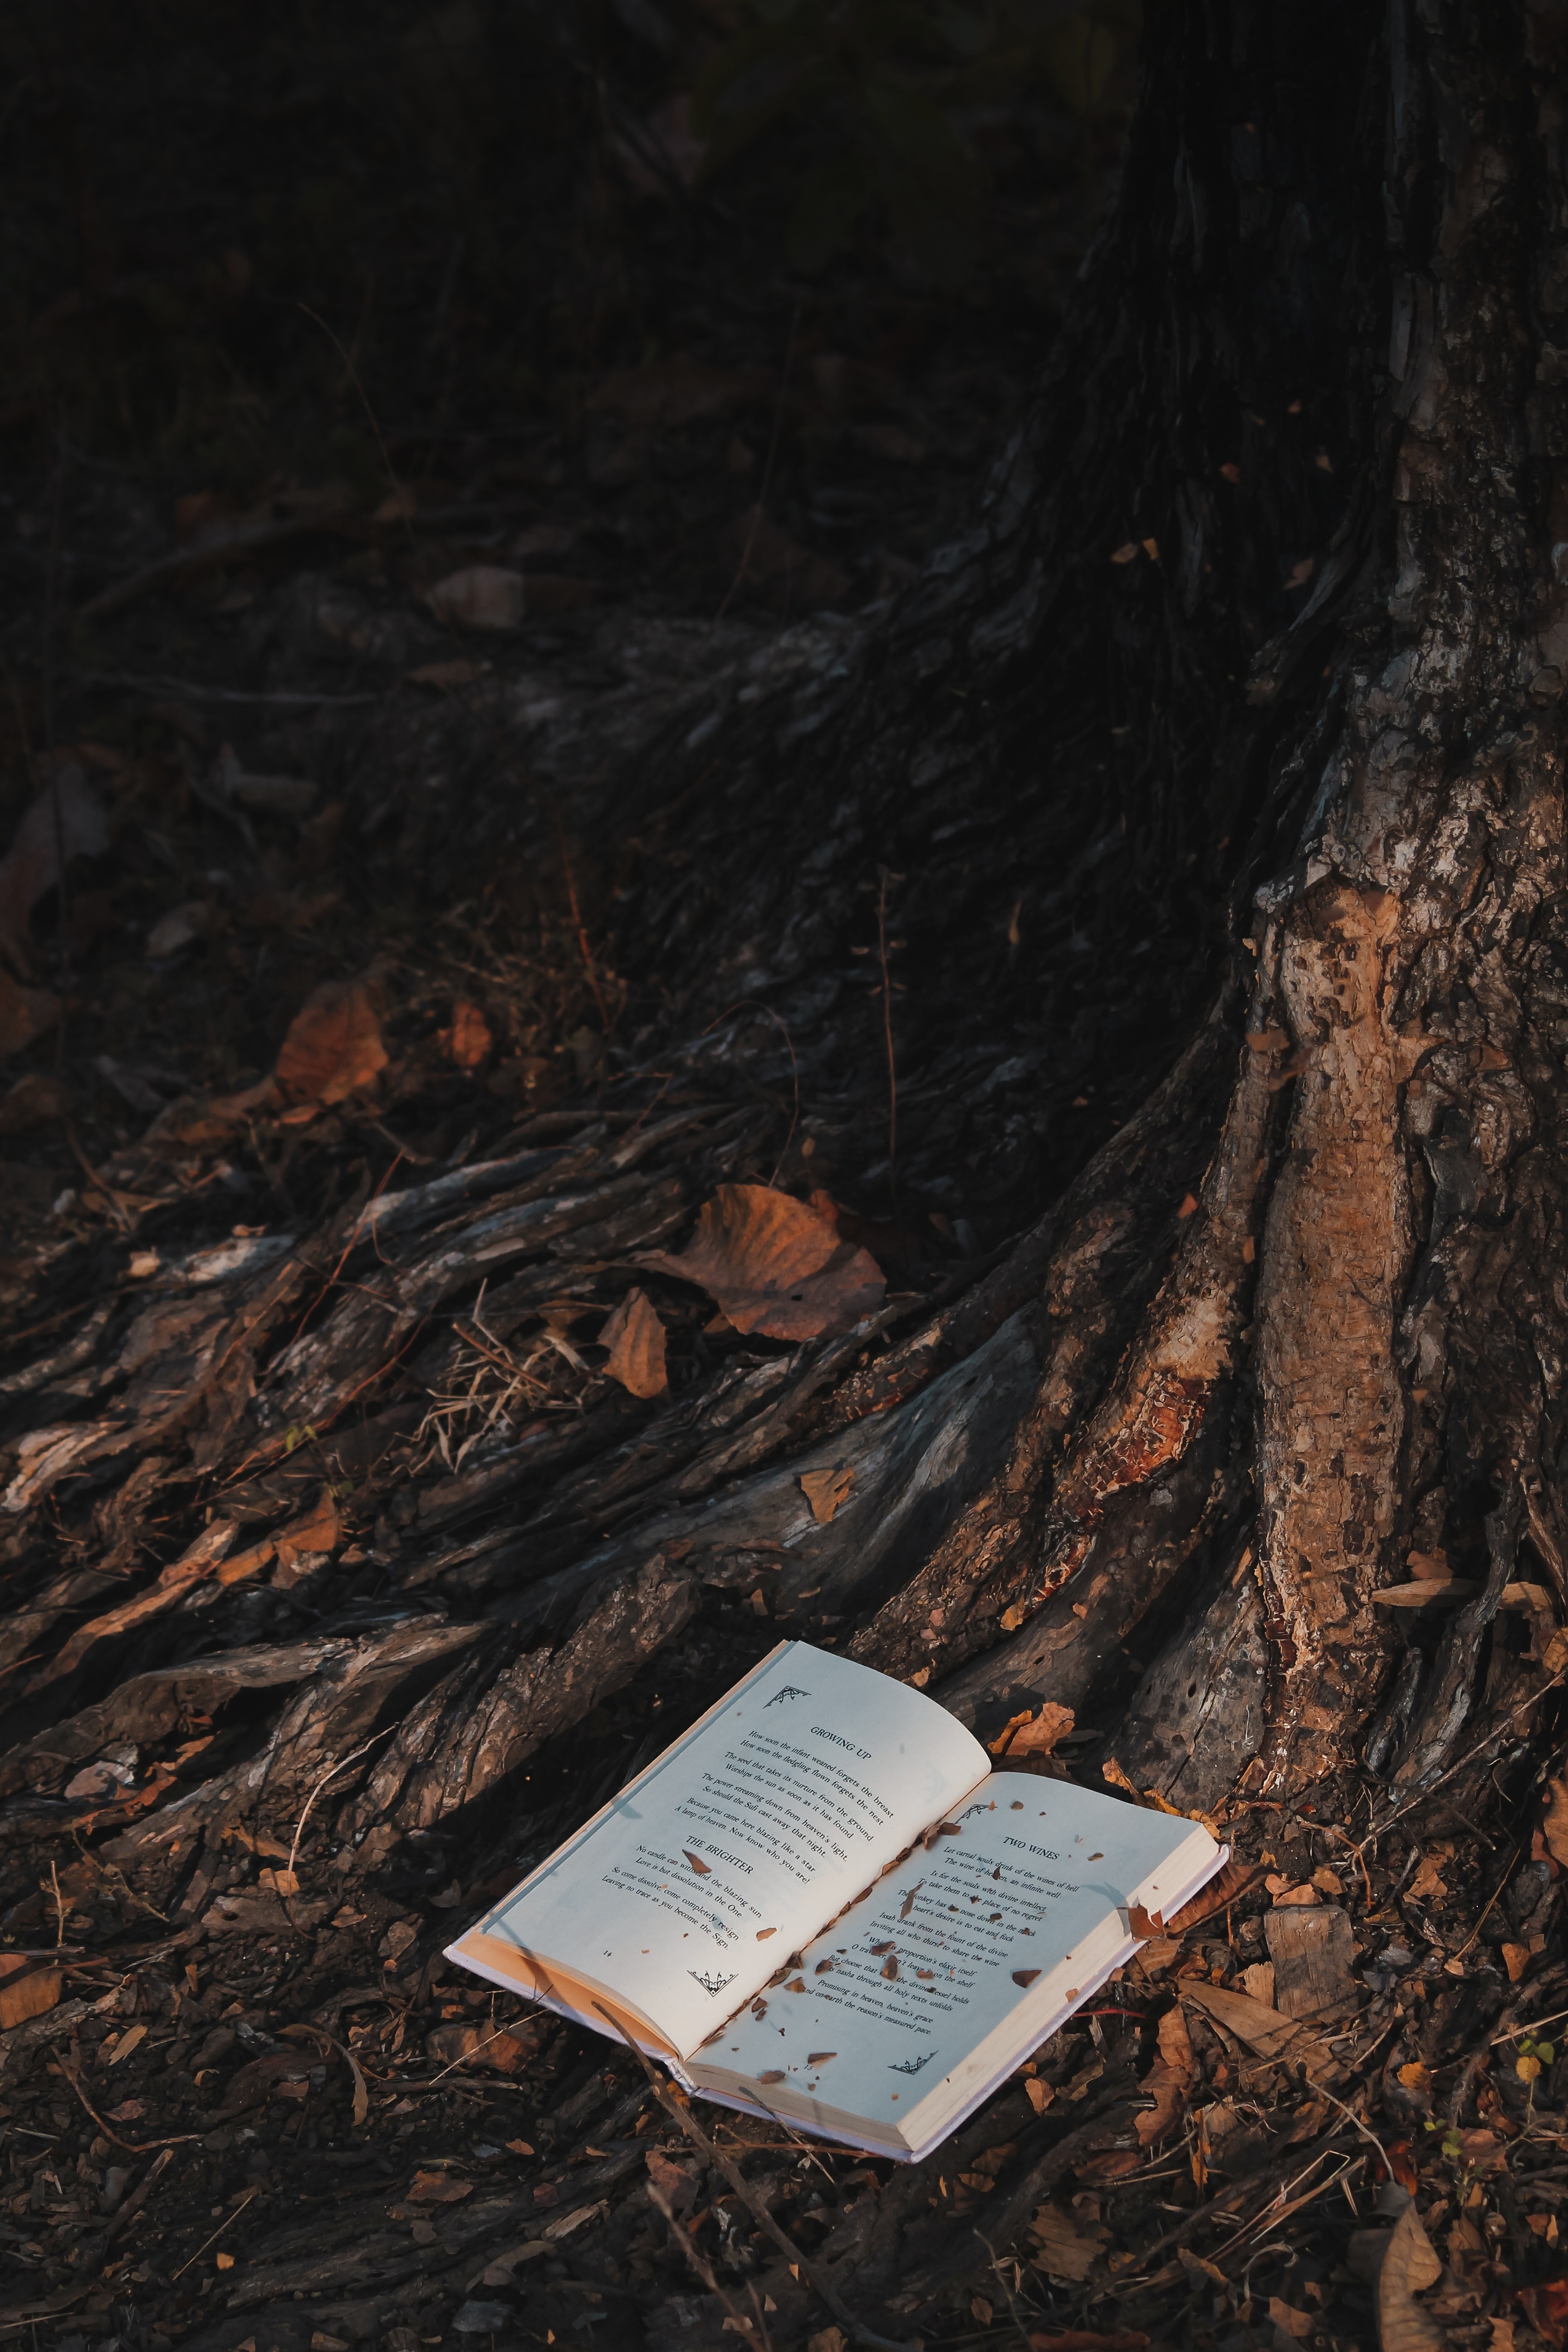 miscellanea, wood, forest, book, miscellaneous, tree images